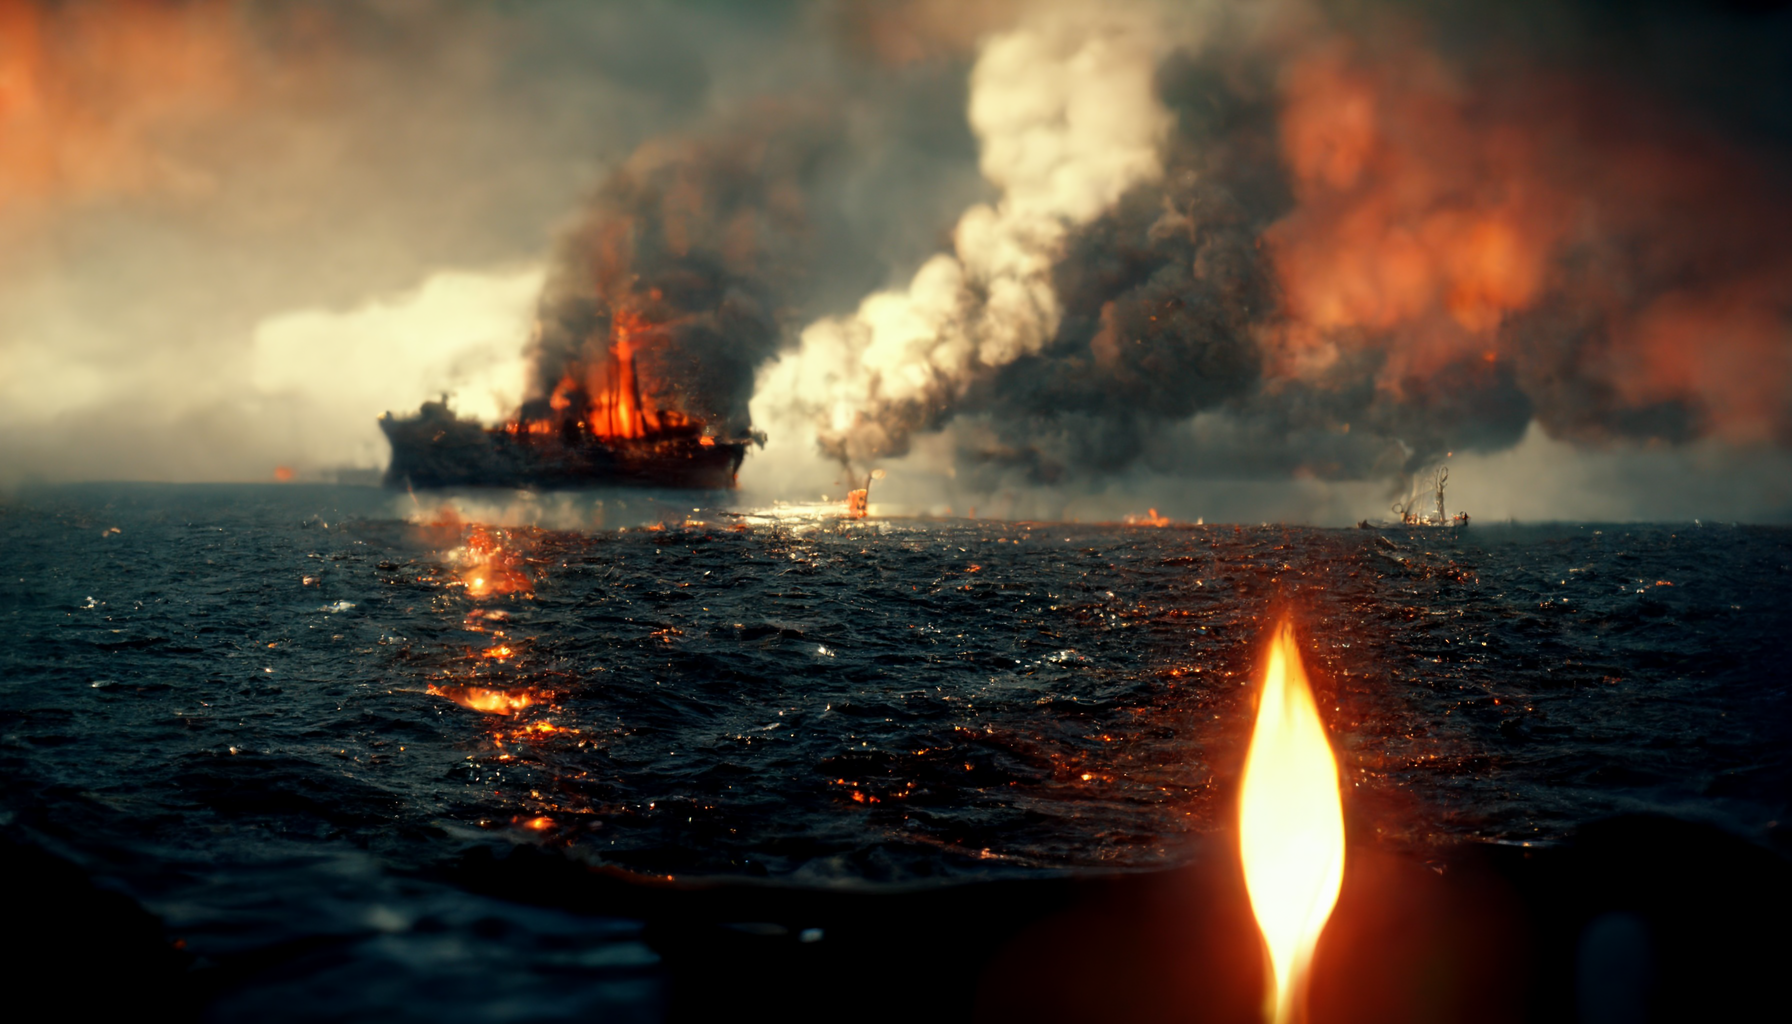 mattlee_A_mysterious_flame_seen_over_the_seas_cinematic_realist_d226dfe1-3ff6-4236-9563-a57c61f8f566